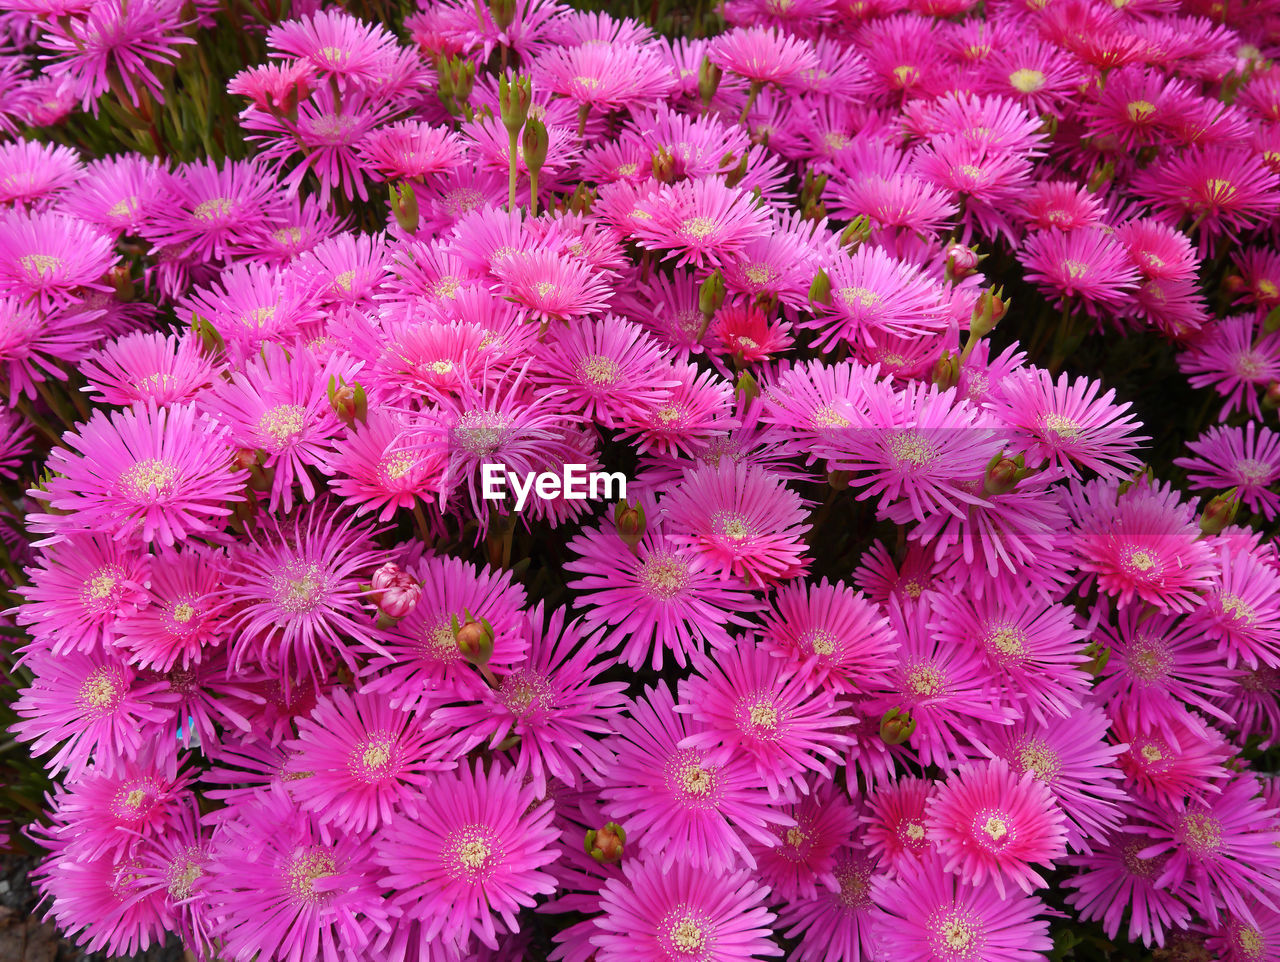 HIGH ANGLE VIEW OF PINK FLOWERING PLANTS